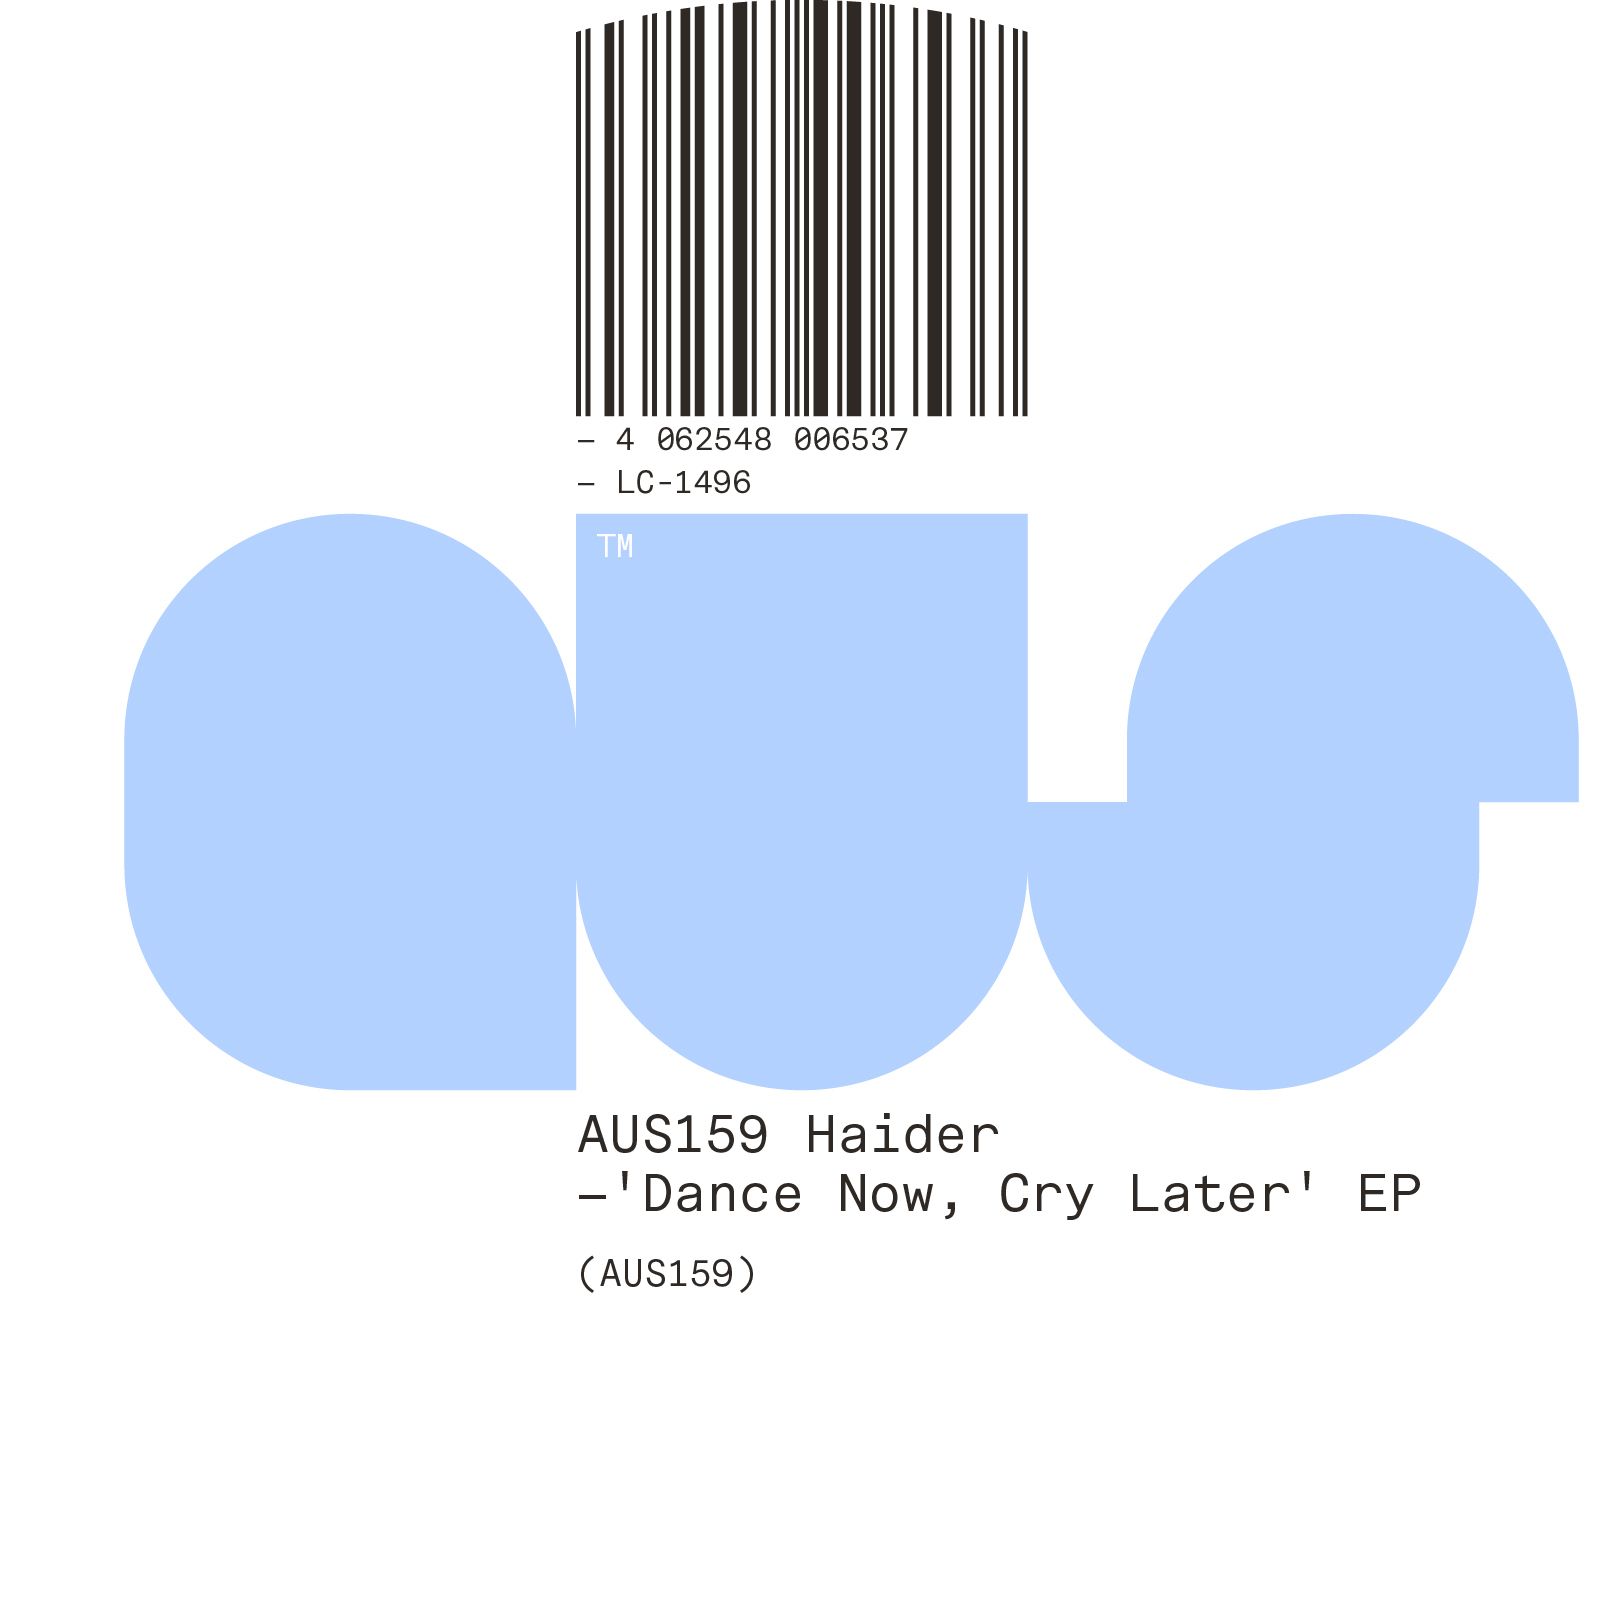 dance now cry later - haider aus music